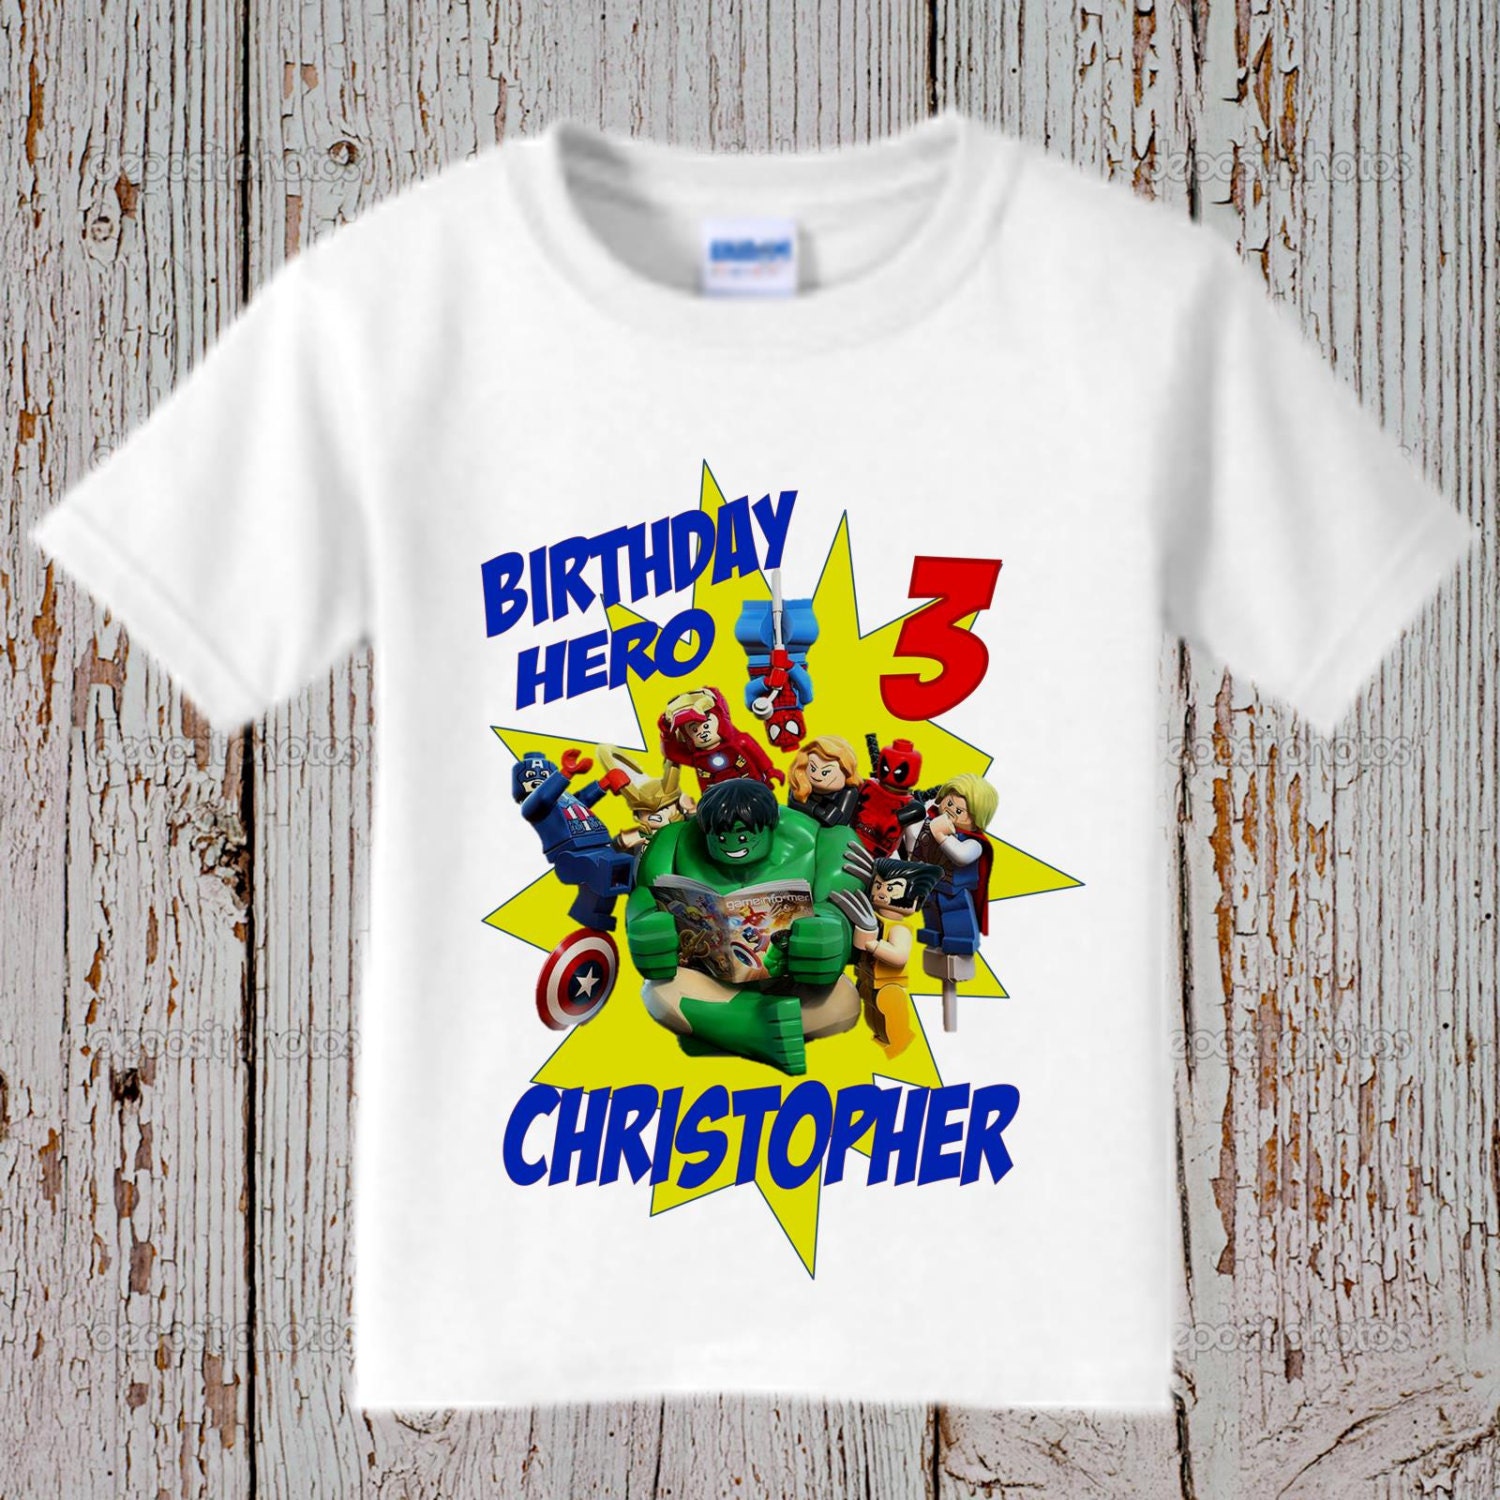 Avengers Birthday Shirt Long and Short Sleeve Available